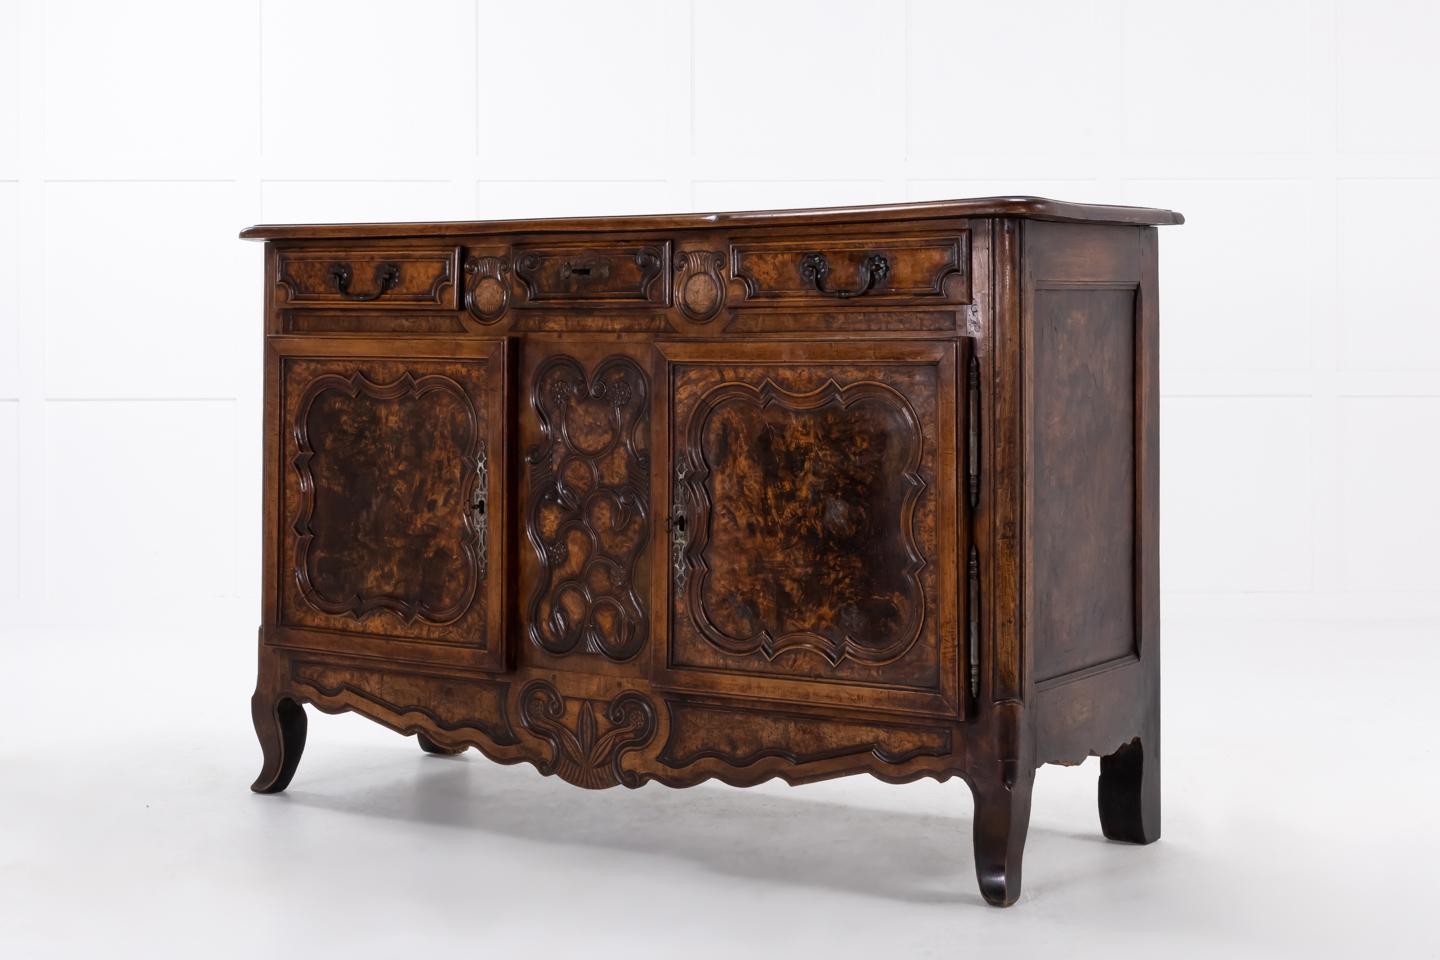 18th century French fruitwood and burr ash buffet with rich original patina and color.